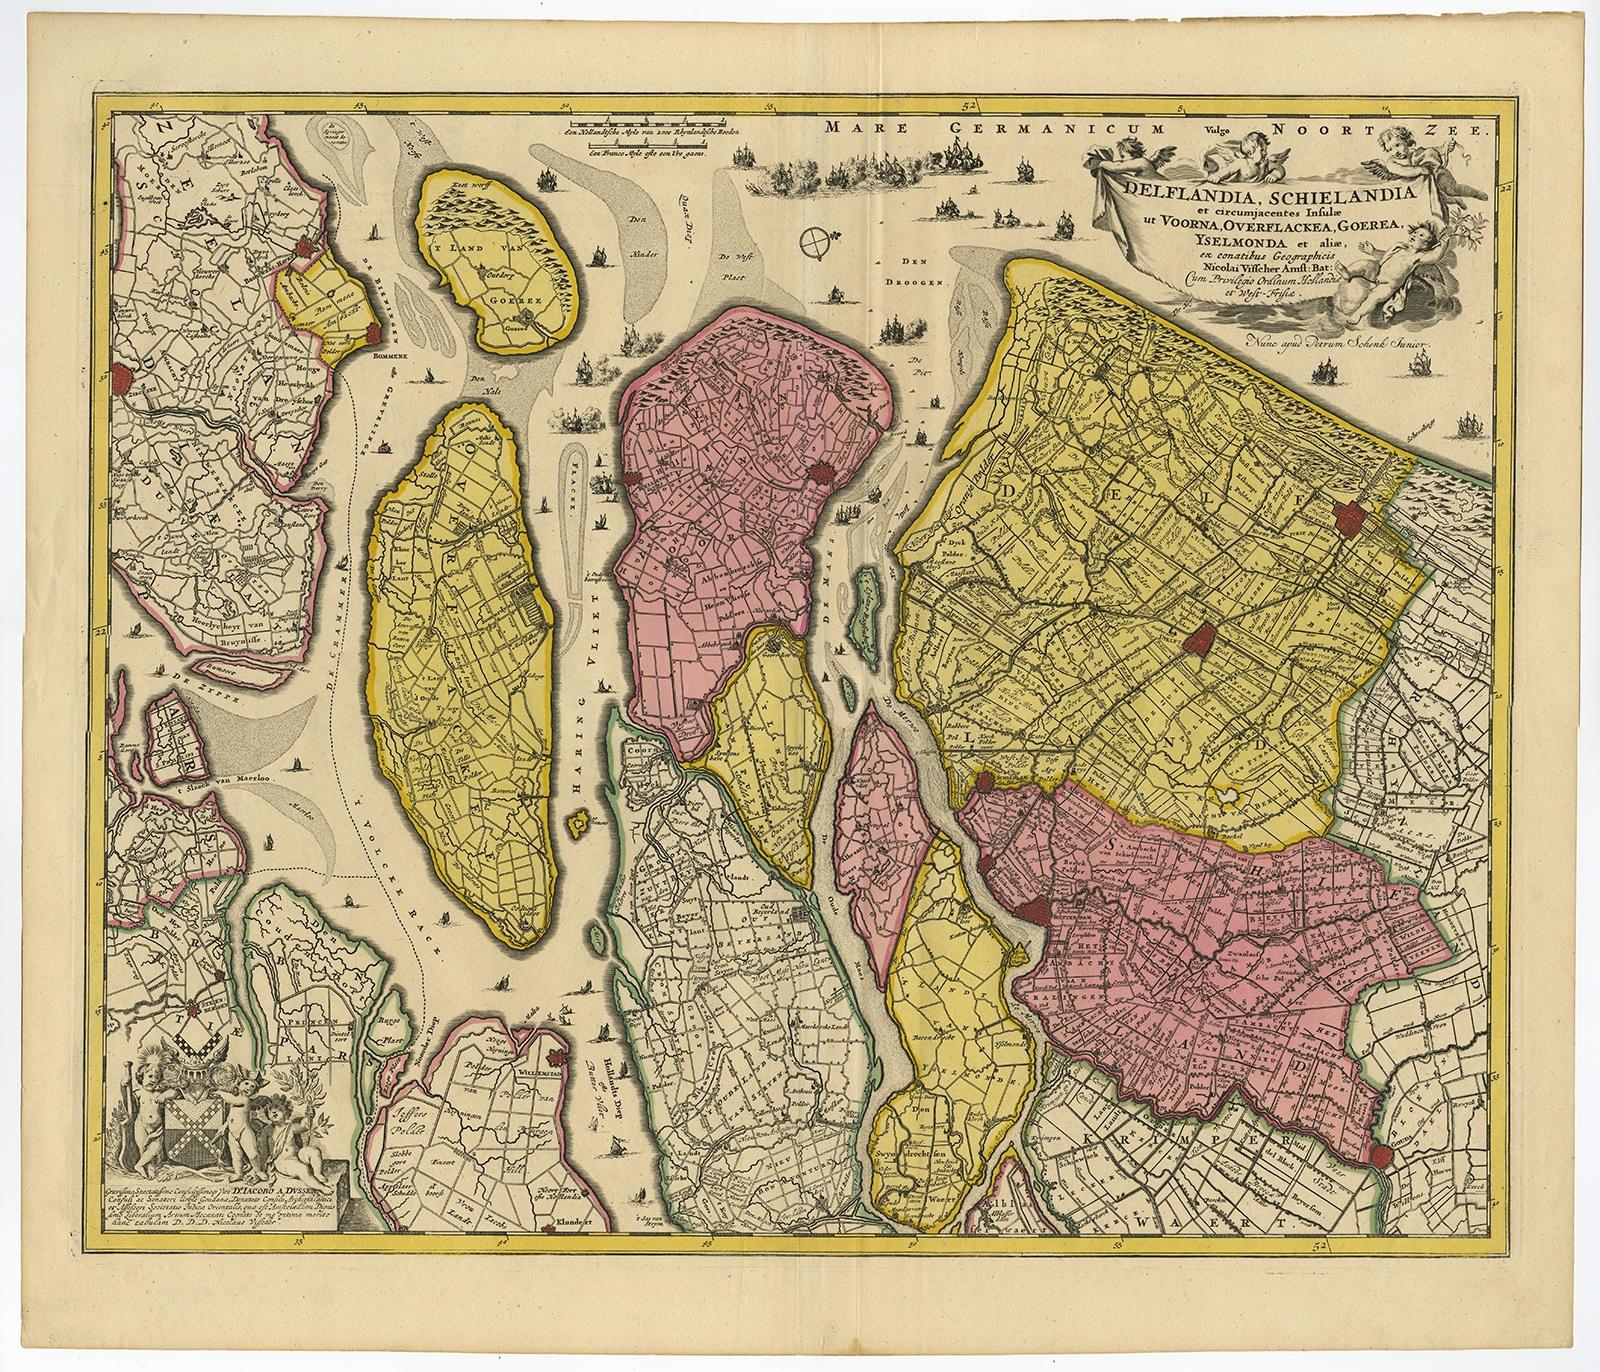 Antique map titled 'Delflandia, Schielandia et circumjacentes Insulae ut Voorna, Overflackea, Goerea, Yselmonda et aliae.' 

Detailed map of Southern Holland, which includes the cities of The Hague ('s-Gravenhage), Rotterdam, Willemstad, Gouda and